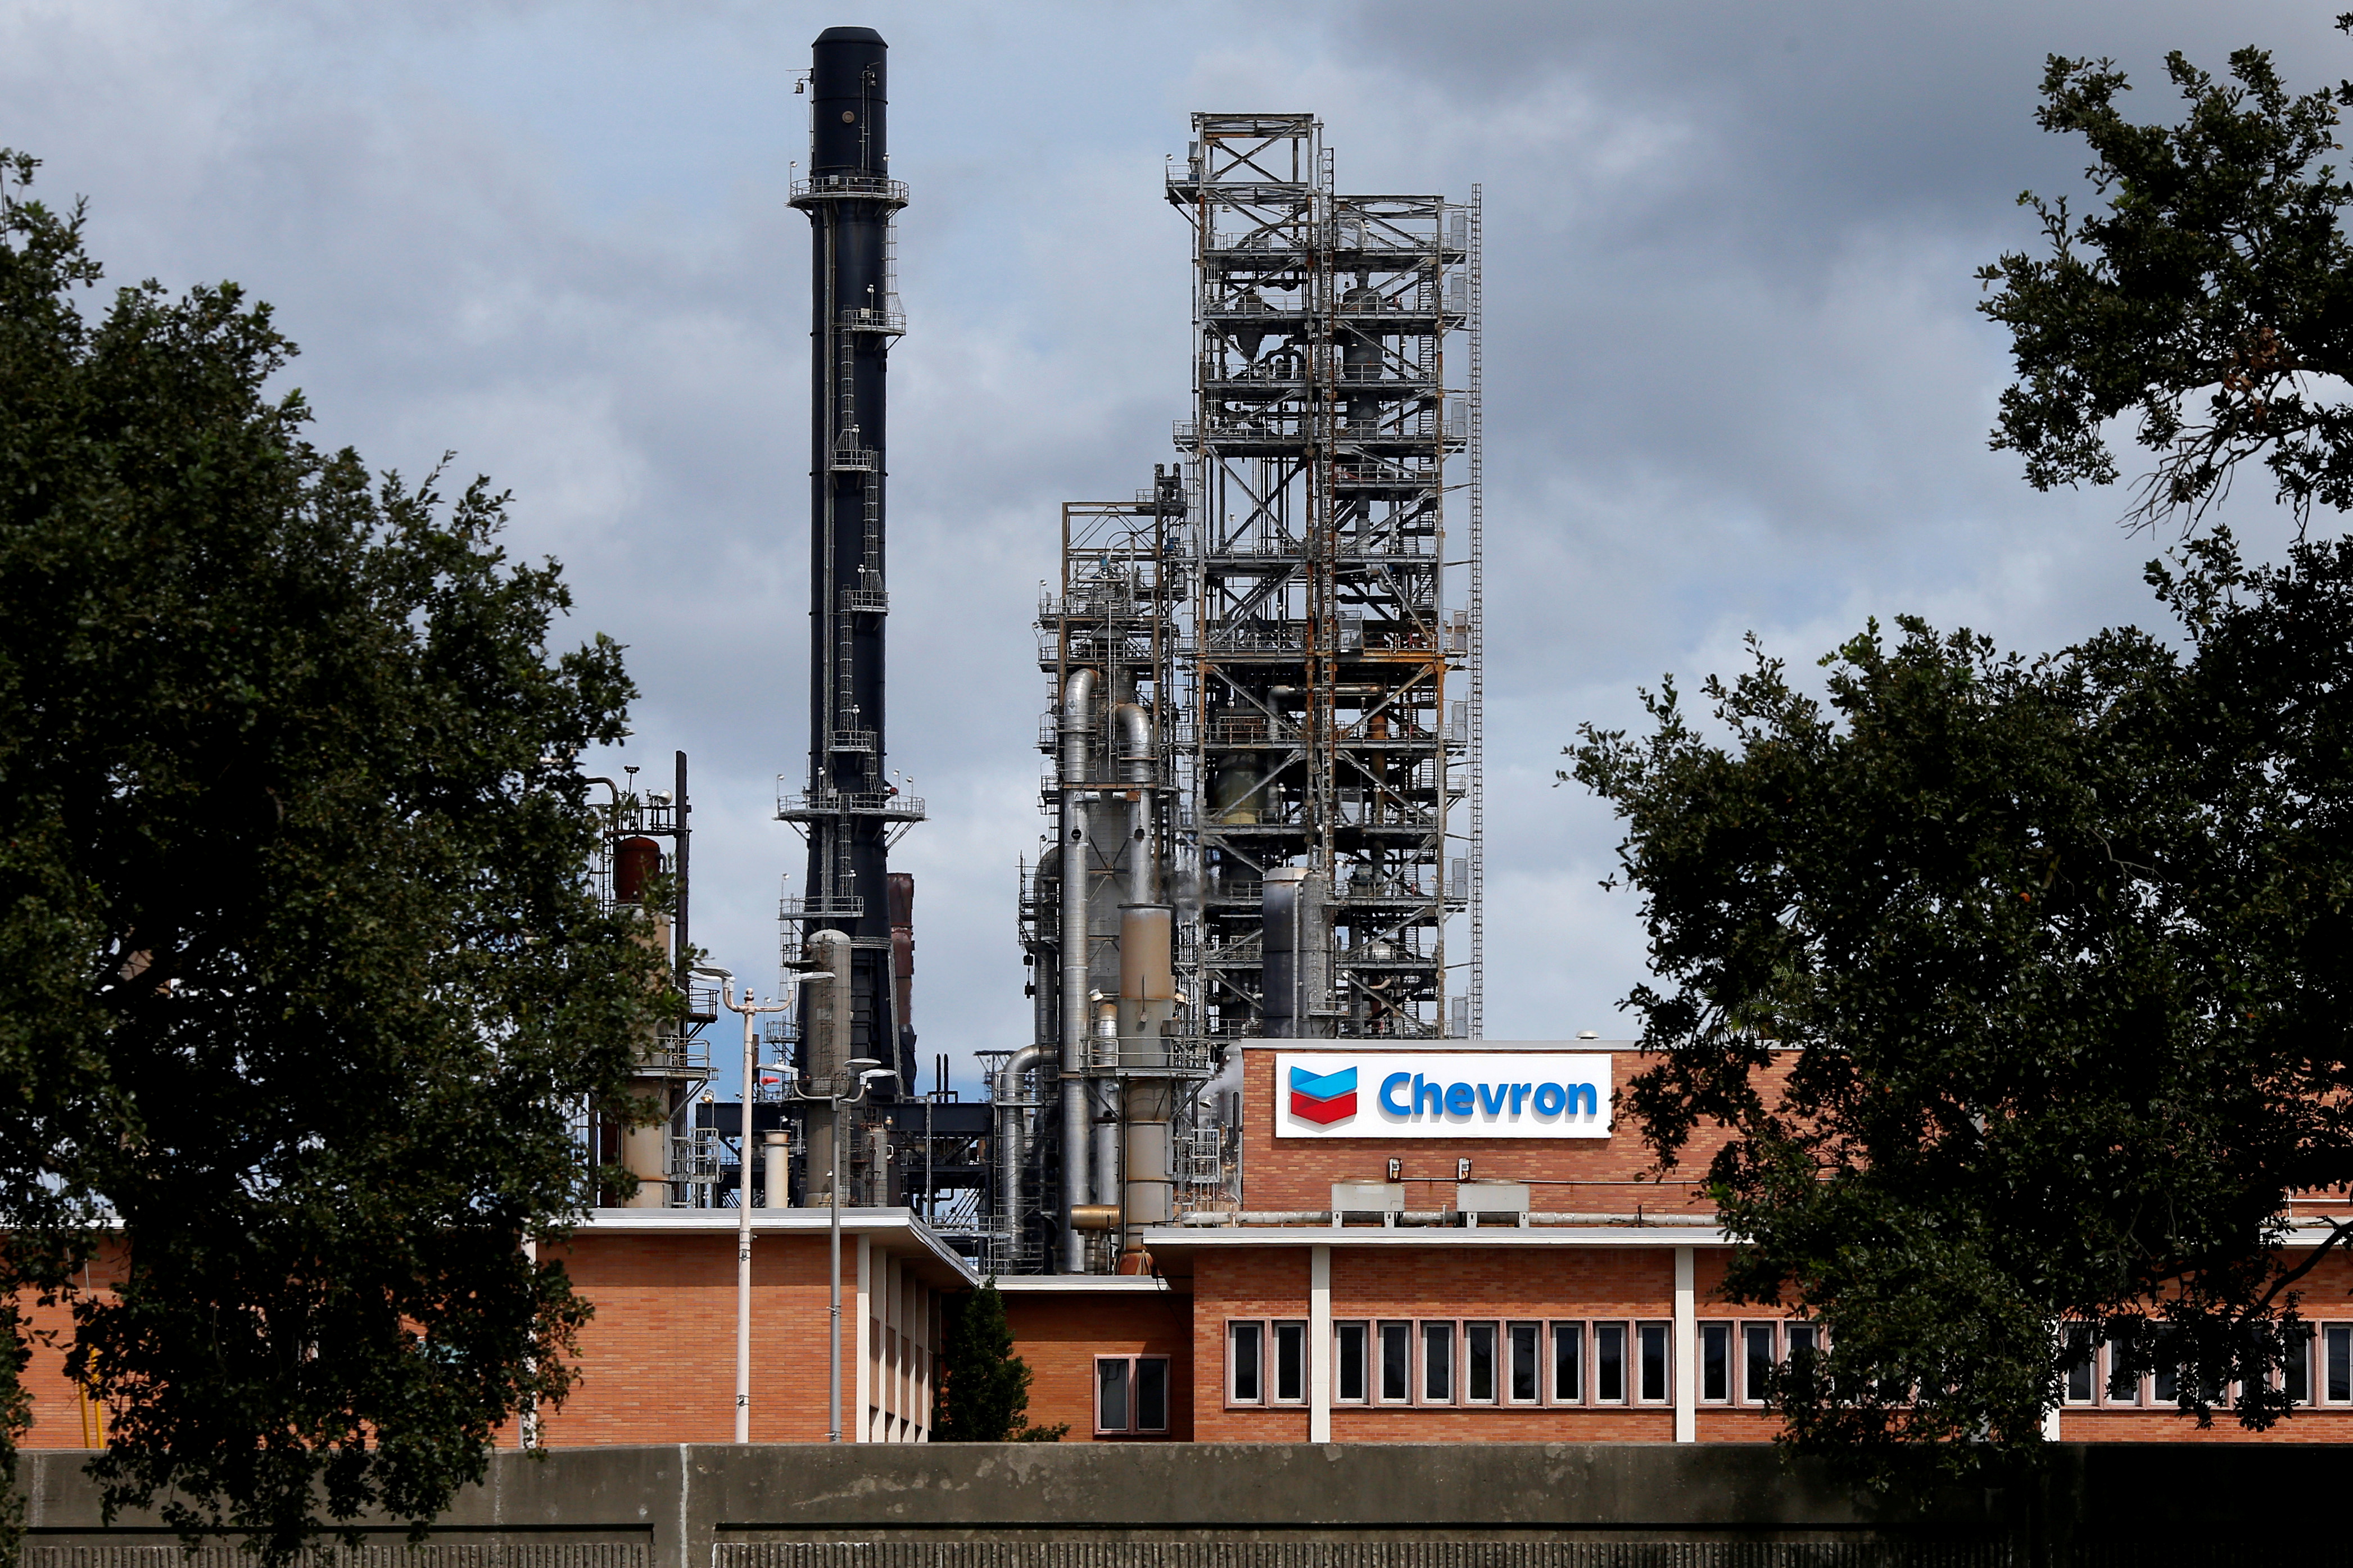 The Chevron Pascagoula Refinery is pictured